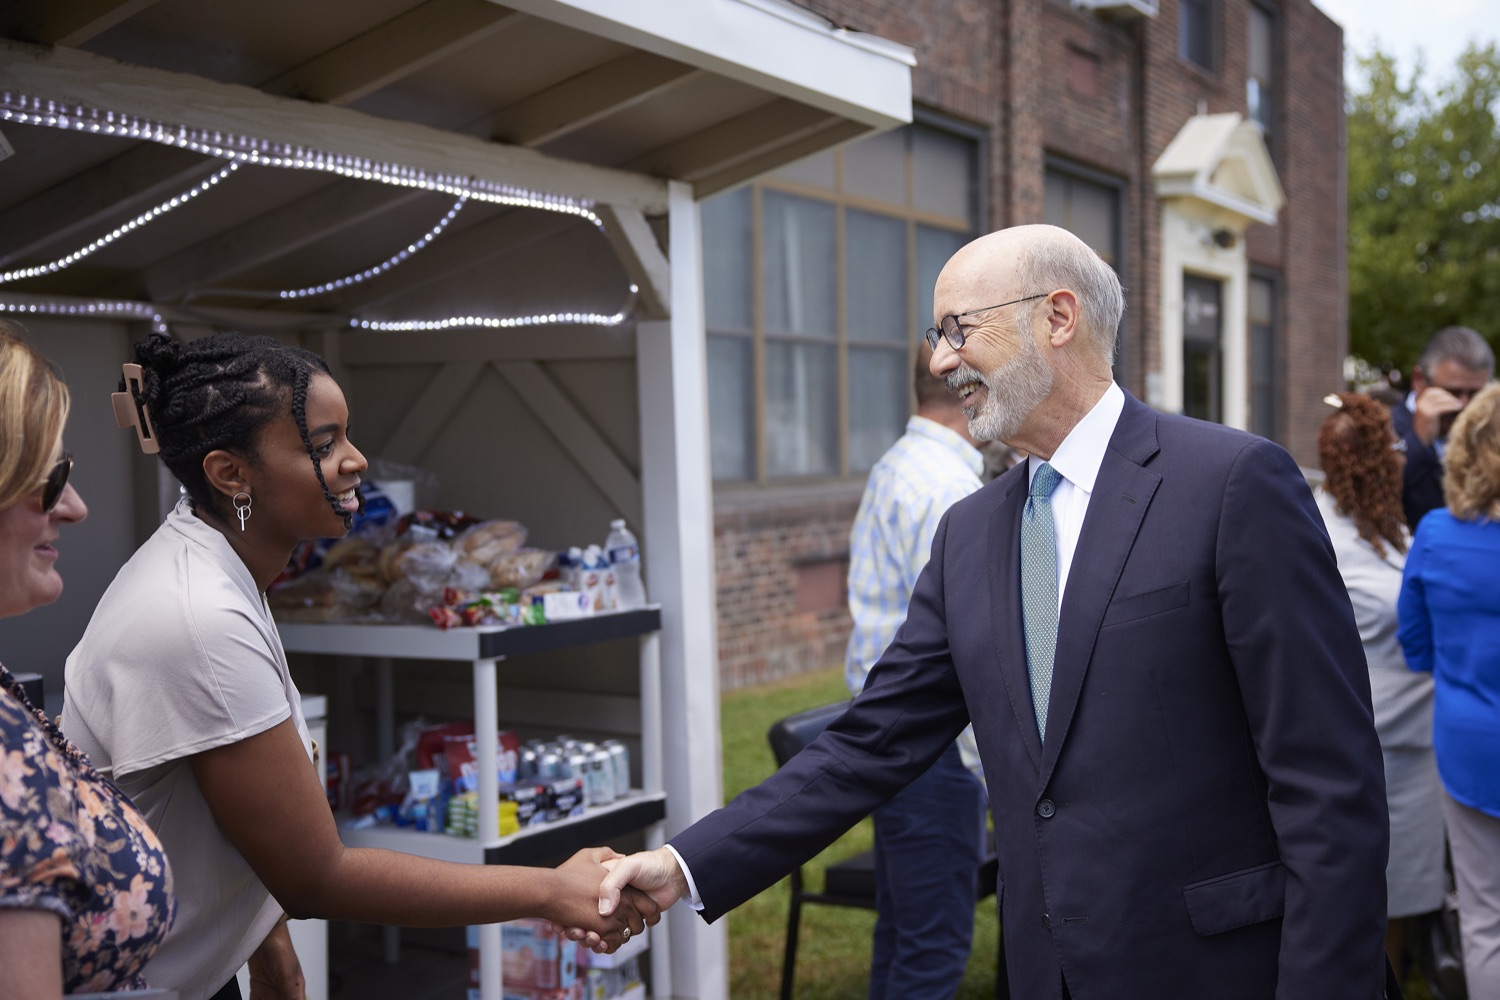 Pennsylvania Governor Tom Wolf greeting attendees.  Governor Tom Wolf was joined by state Representative David Delloso and stakeholders and community members to discuss the reintroduction of the PA Opportunity Program, which would send $2,000 checks directly to Pennsylvanians. I first proposed the PA Opportunity Program back in February, but Republican leaders in the General Assembly just wouldnt get on board with funding it in this years budget, said Gov. Wolf. However, as Ive traveled the commonwealth, Ive heard directly from so many people about how much this program would mean to them and their families. Im not going to stop fighting until the people of Pennsylvania get the help they need and deserve. Folcroft, PA  August 2, 2022<br><a href="https://filesource.amperwave.net/commonwealthofpa/photo/22070_gov_opportunityFund_dz_006.JPG" target="_blank">⇣ Download Photo</a>